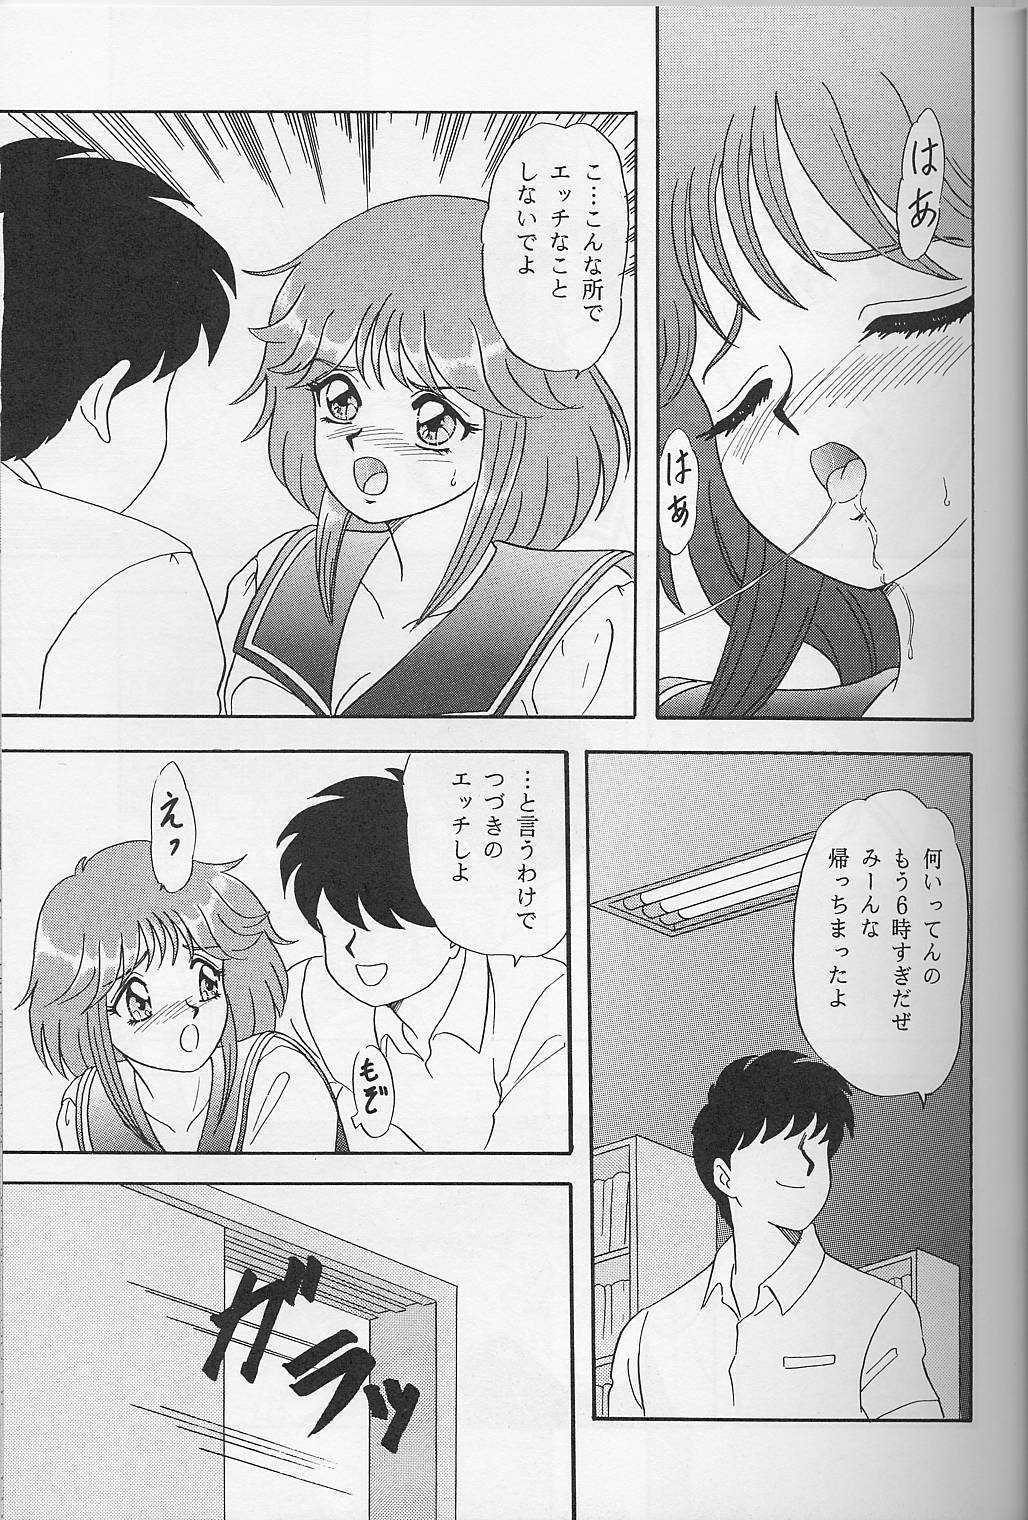 18 Year Old Lunch Time 7 - Tokimeki memorial Lovers - Page 10